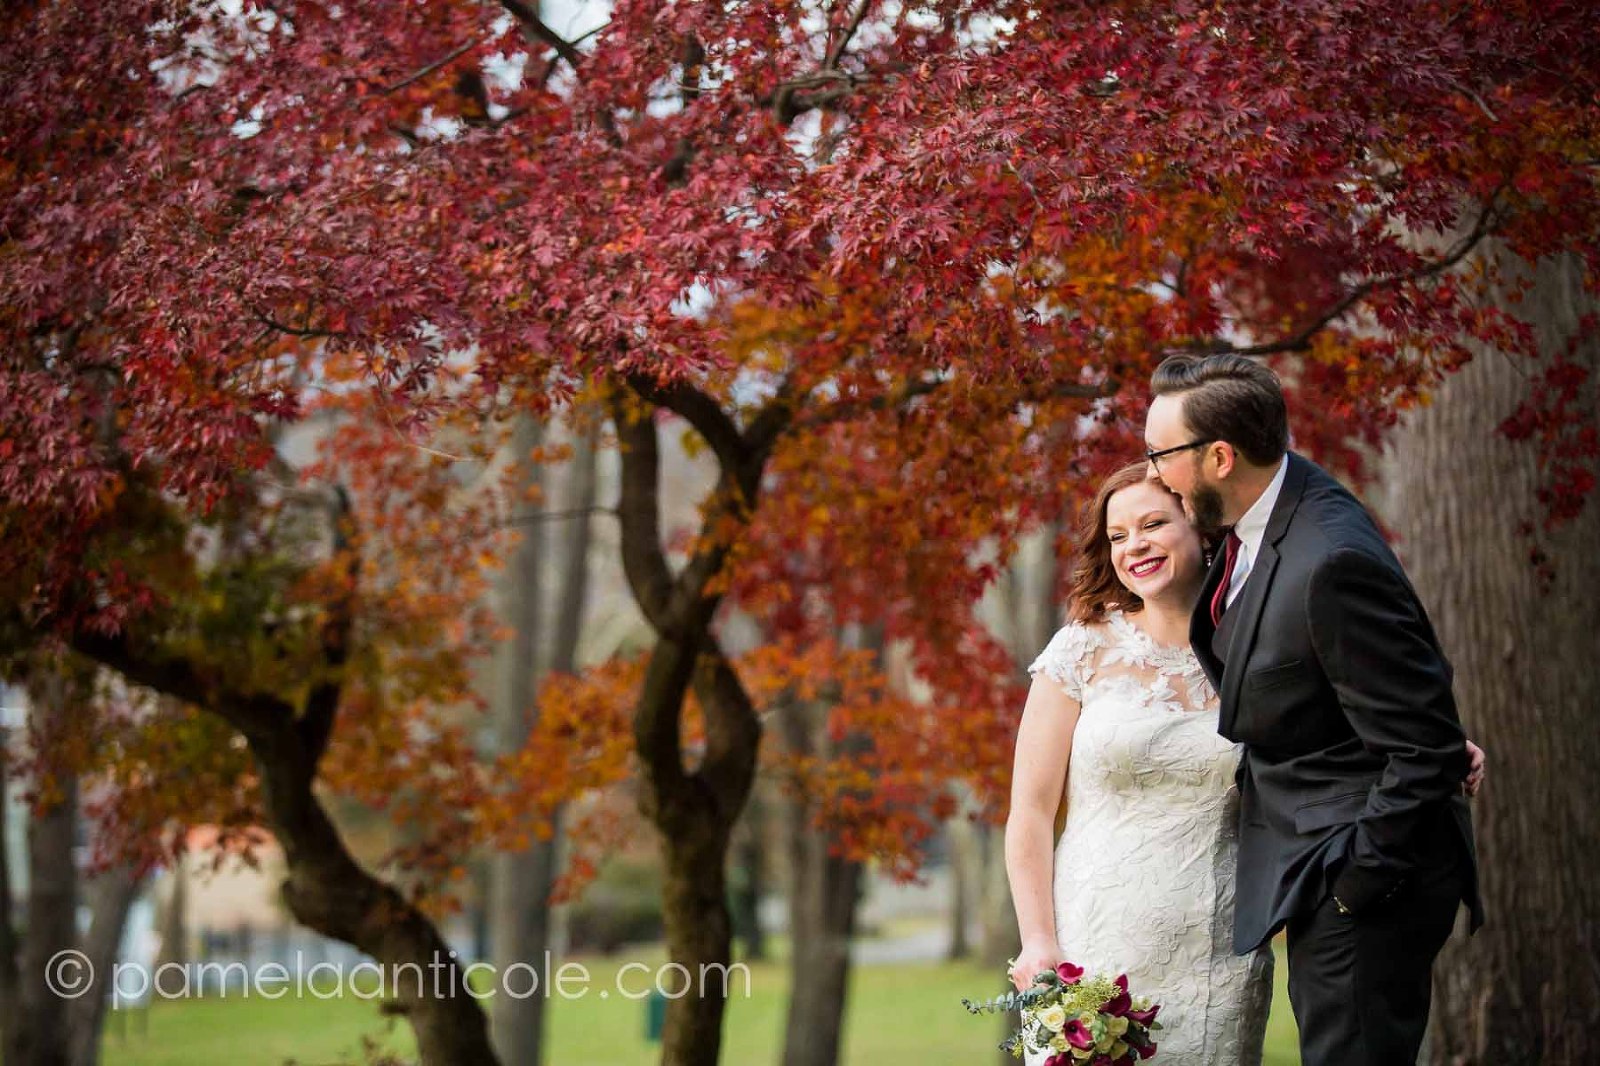 bride and groom laugh together in allegheny cemetery, in front of a red tree in the autumn